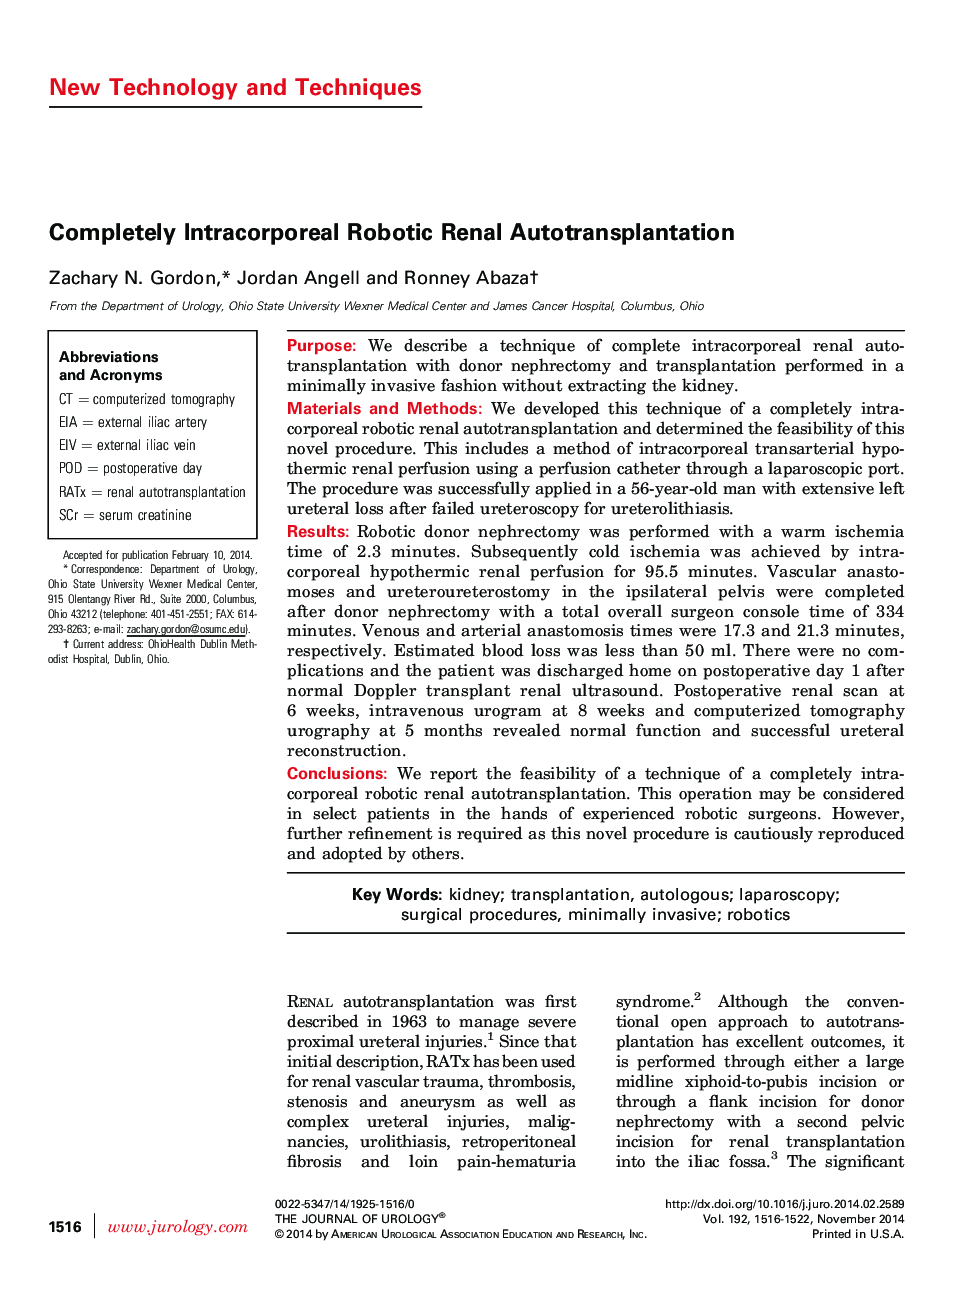 Completely Intracorporeal Robotic Renal Autotransplantation